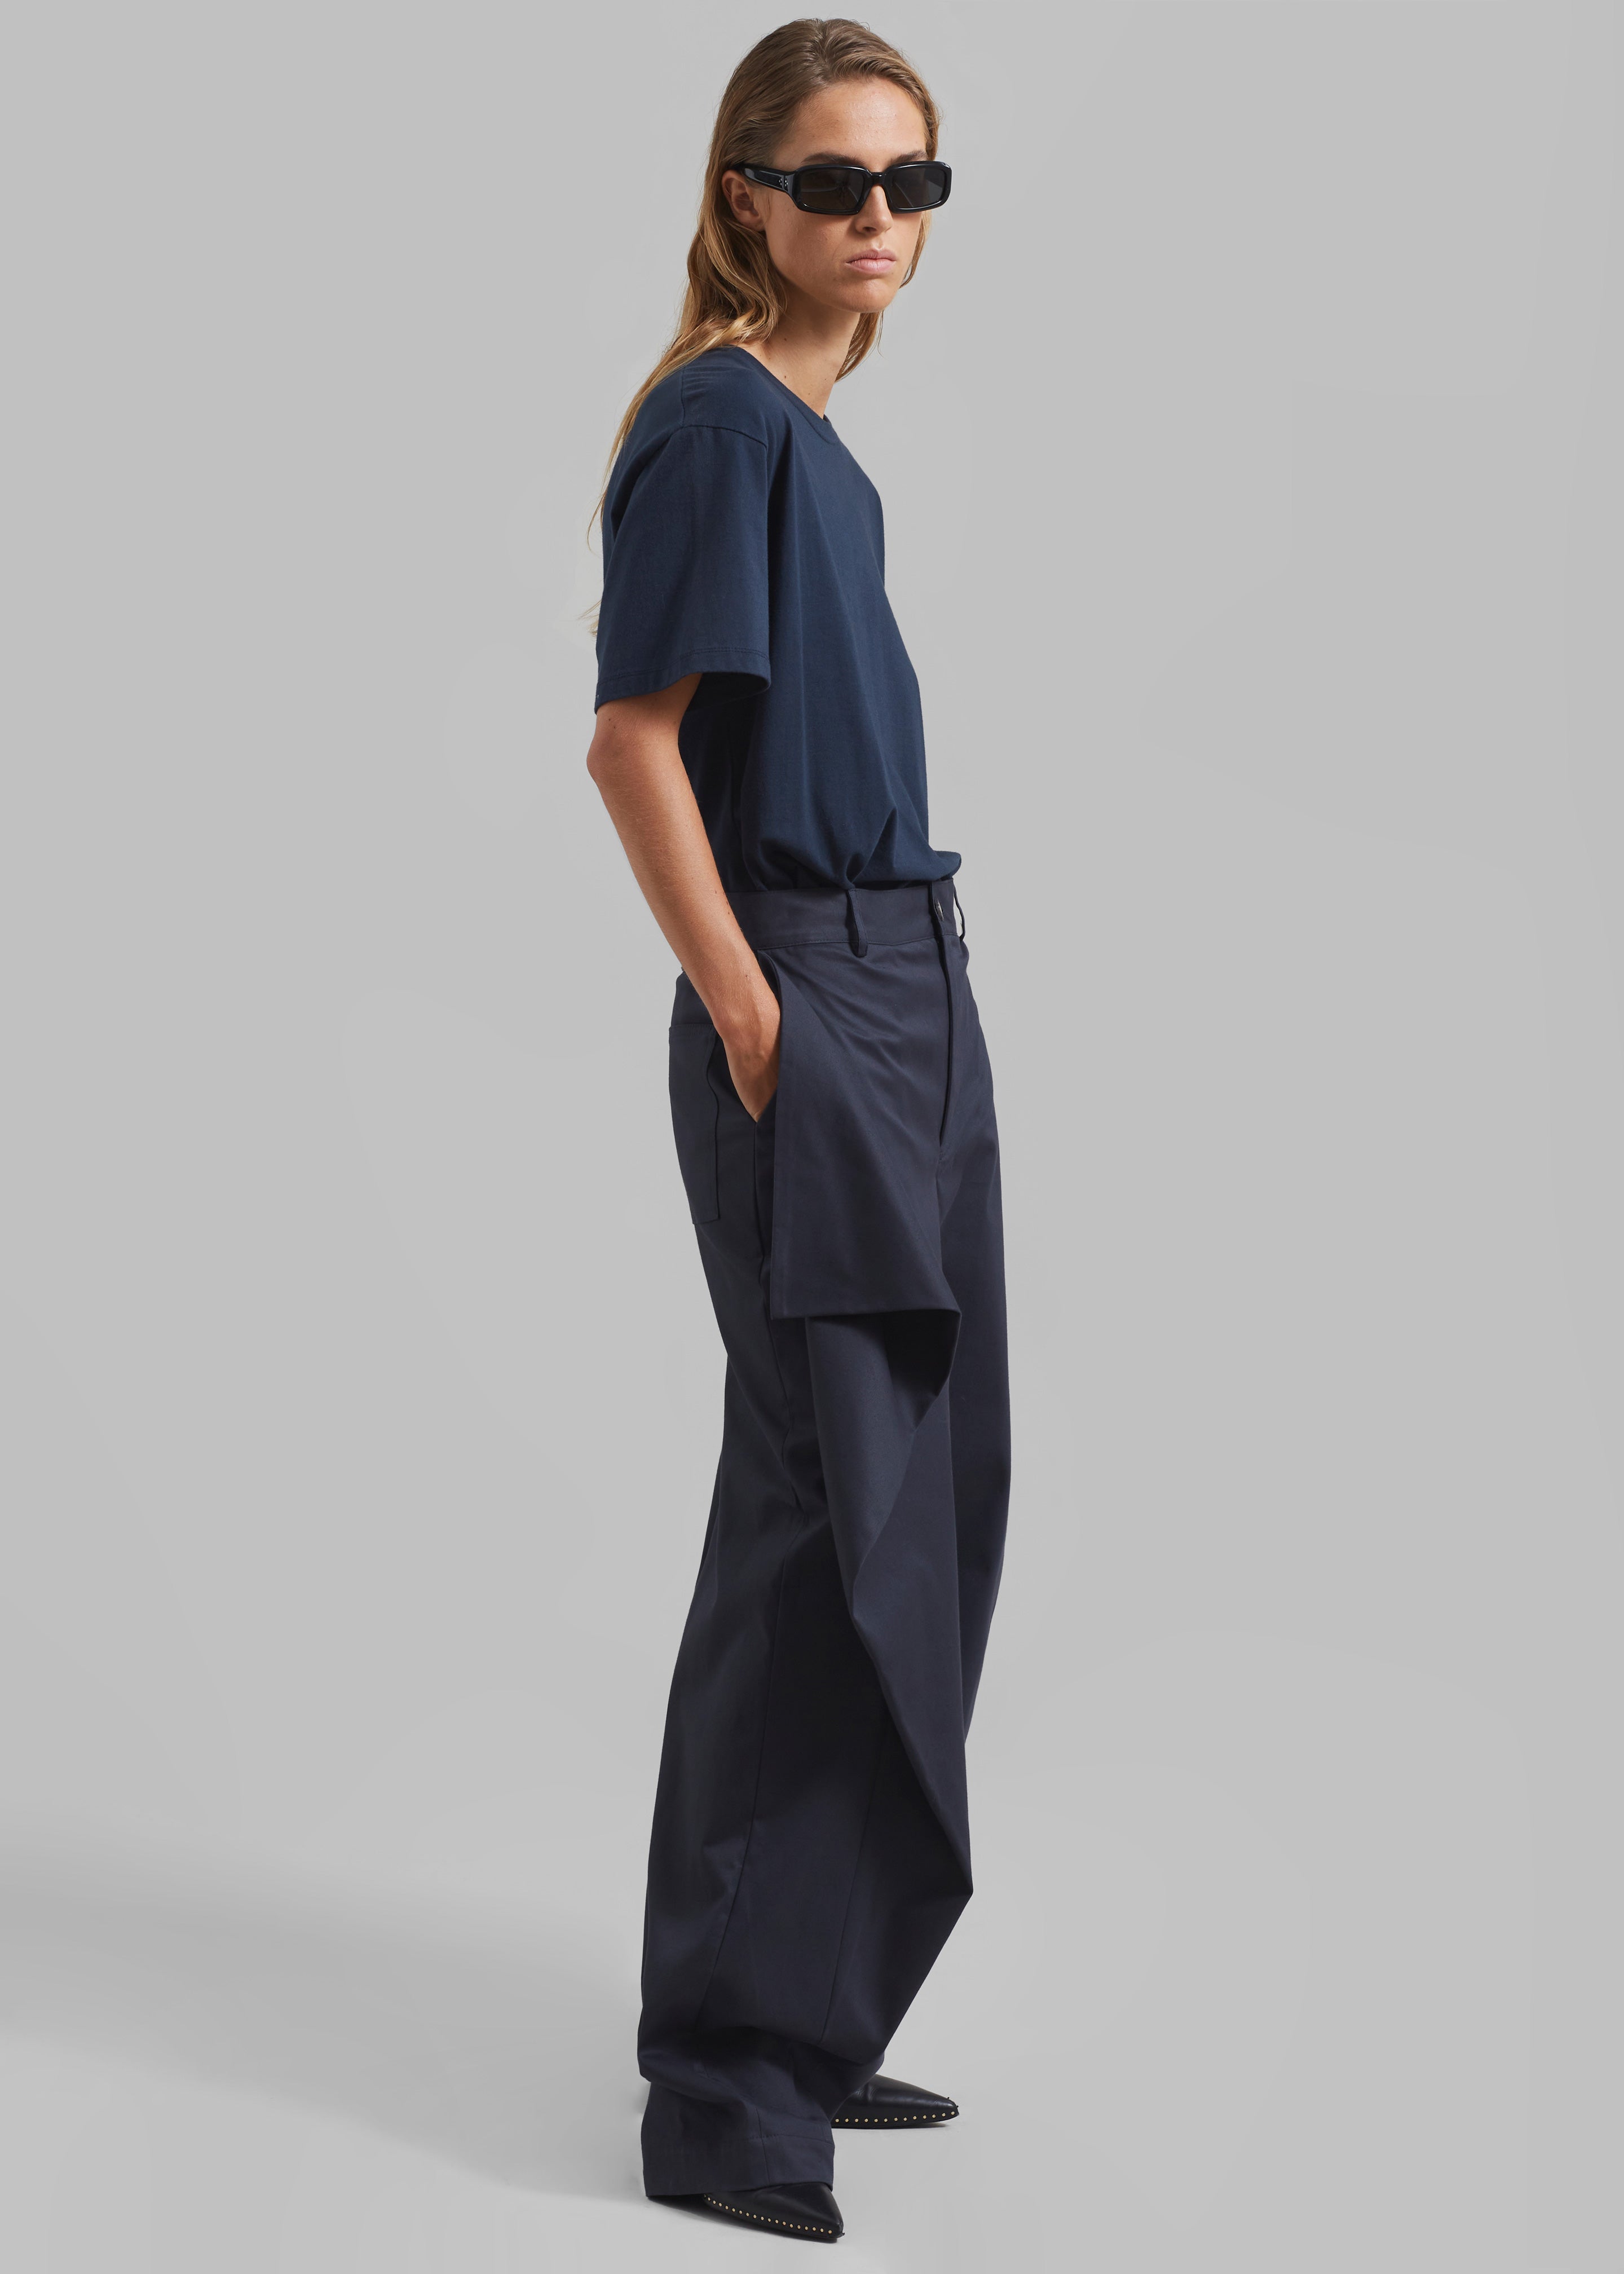 JW Anderson Kite Trousers - Navy - 4